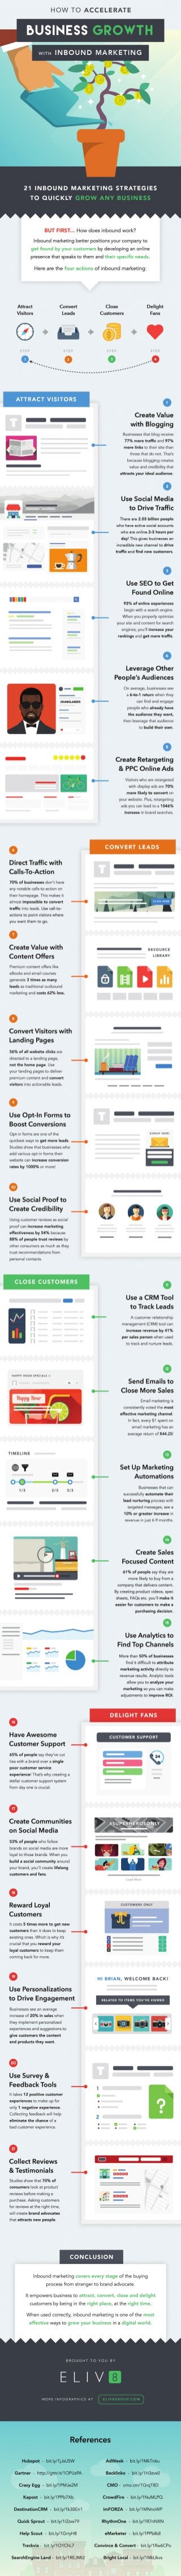 21 Strategies for Growing Your Business With Inbound Marketing (Infographic)